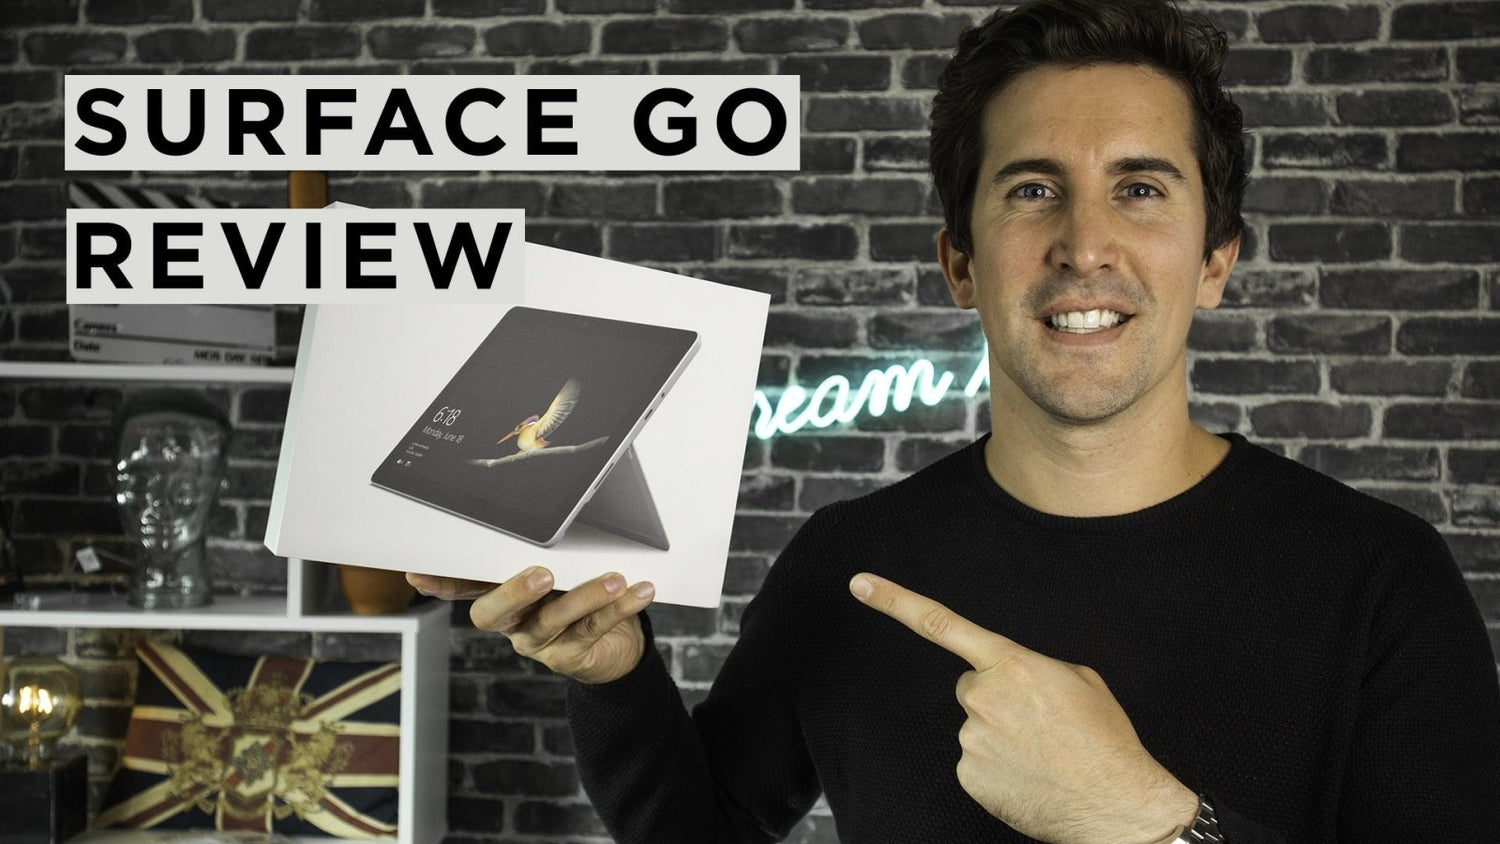 Microsoft Surface Go Review - Full Video Review - Editors Keys